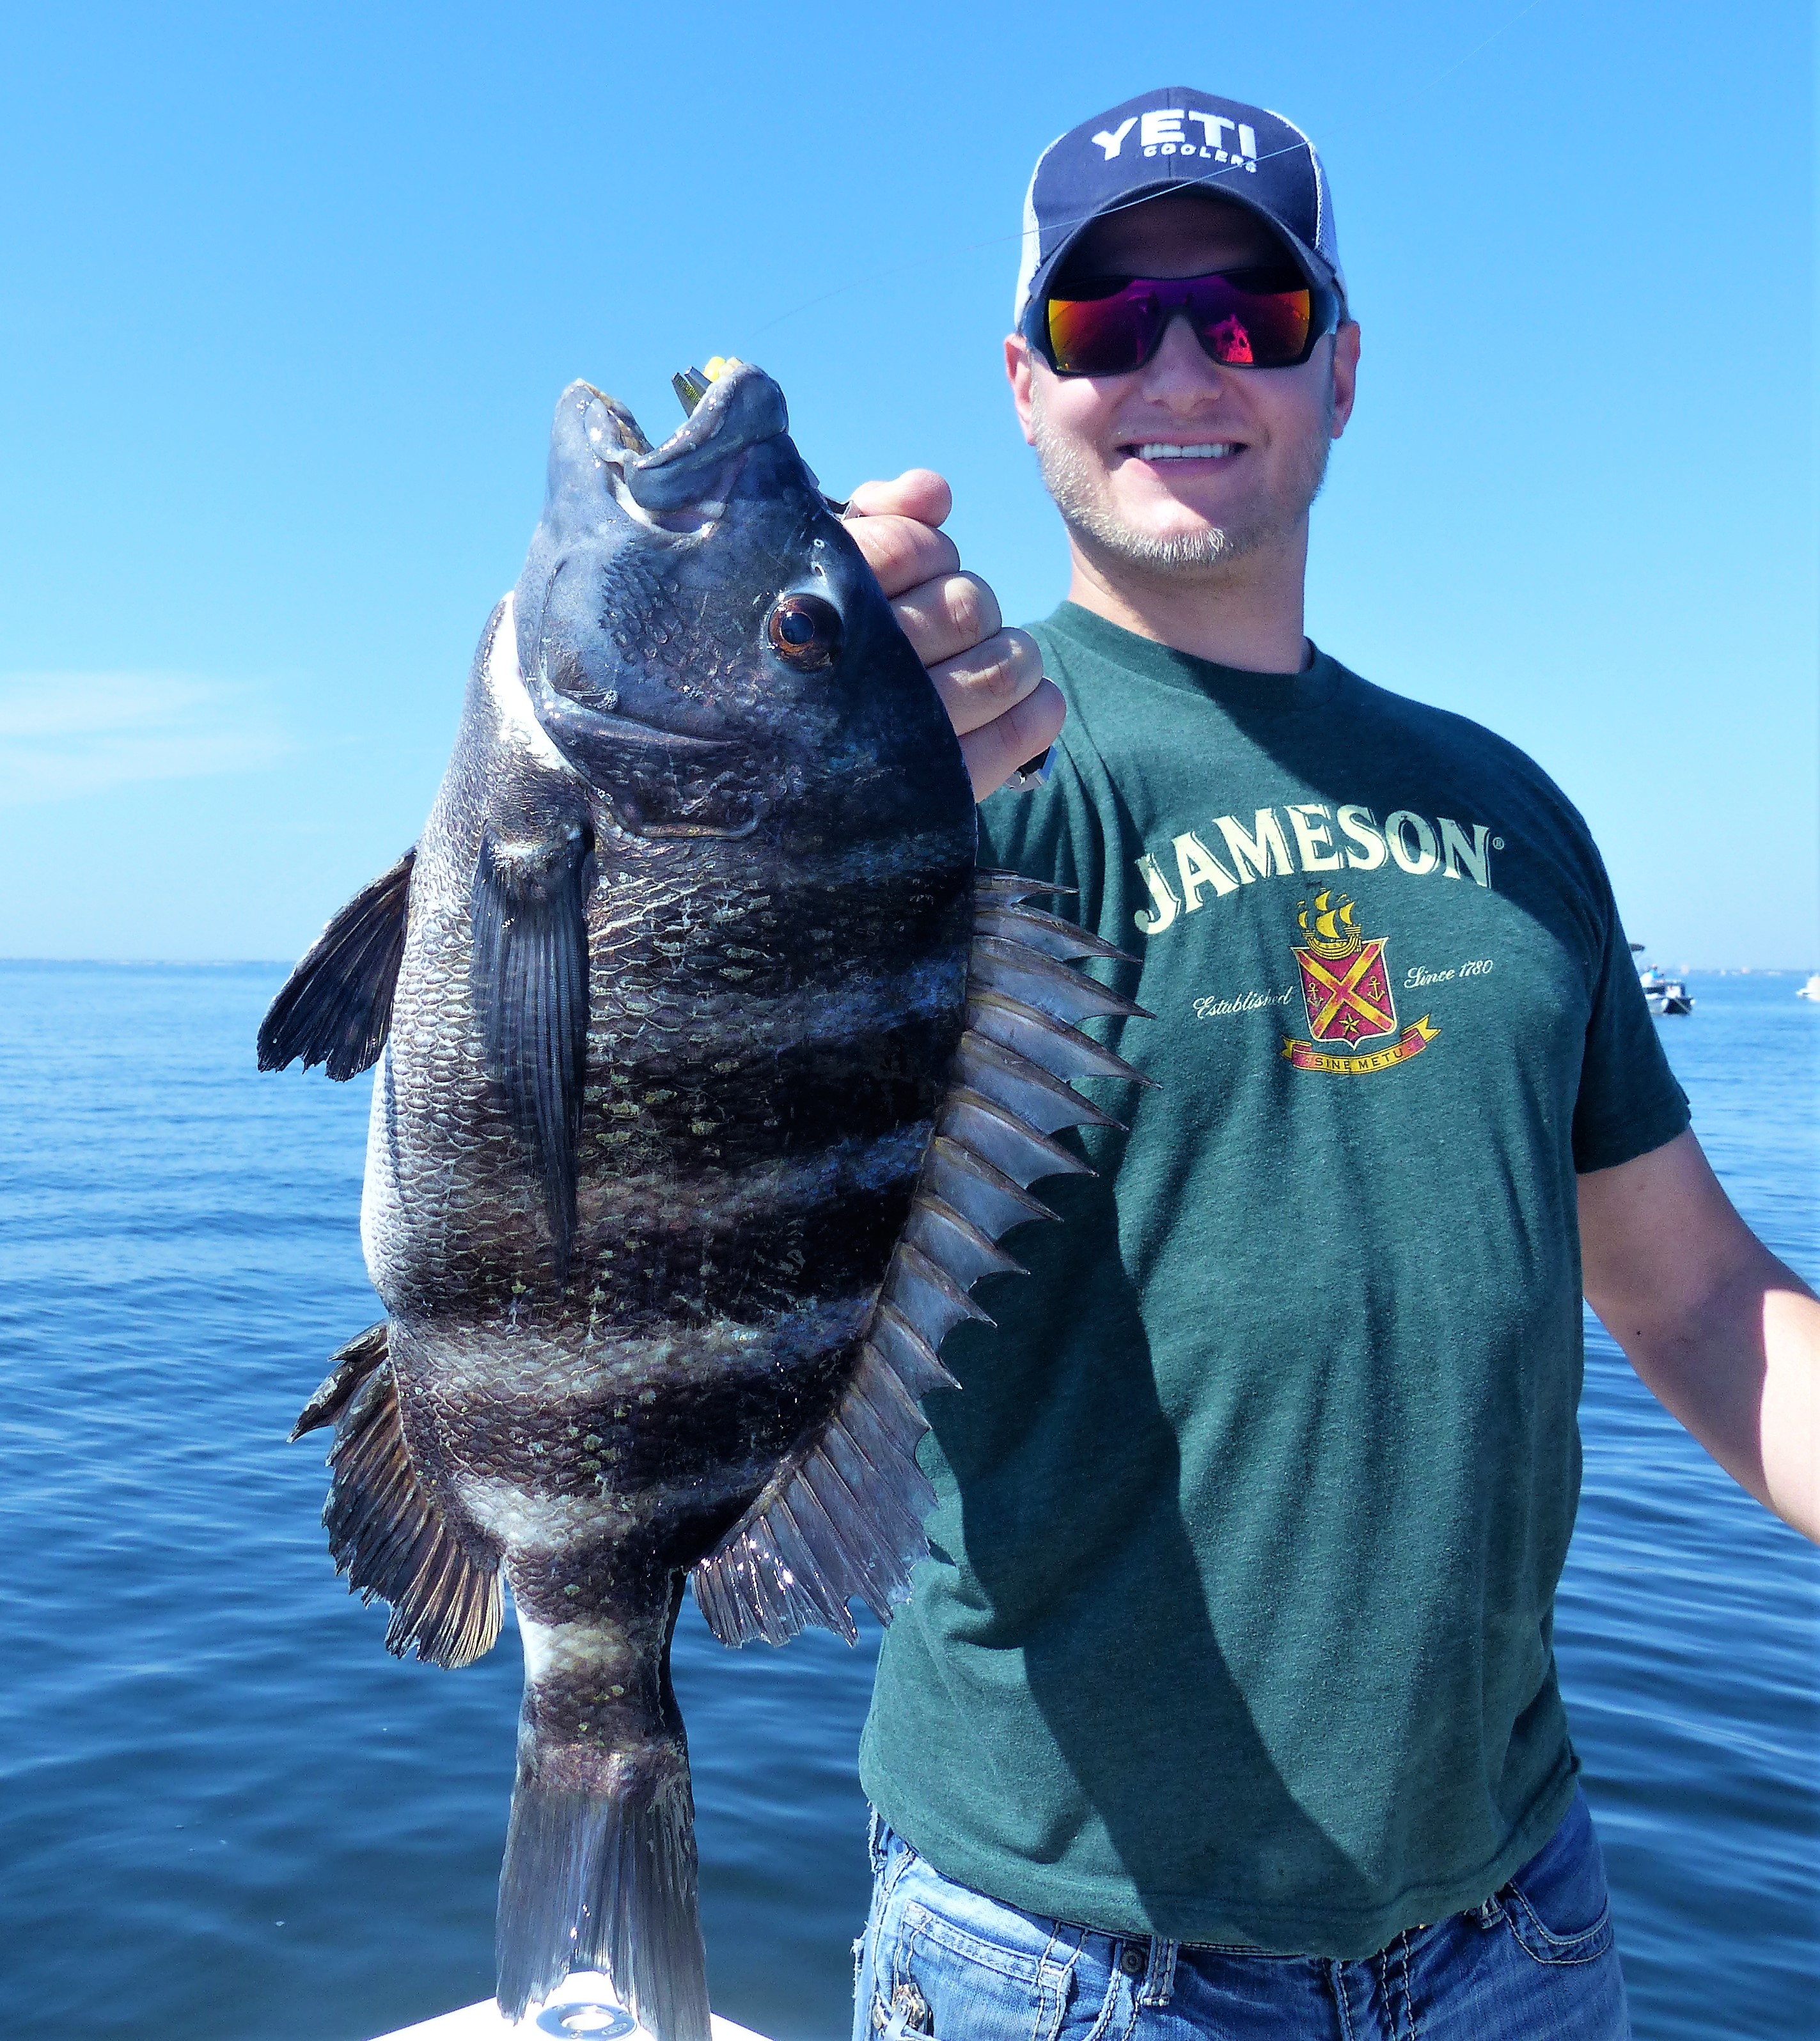 The "Fish Coach" shares HOW-to-CATCH Saltwater Sheepshead - a Winter Fishing Delicacy